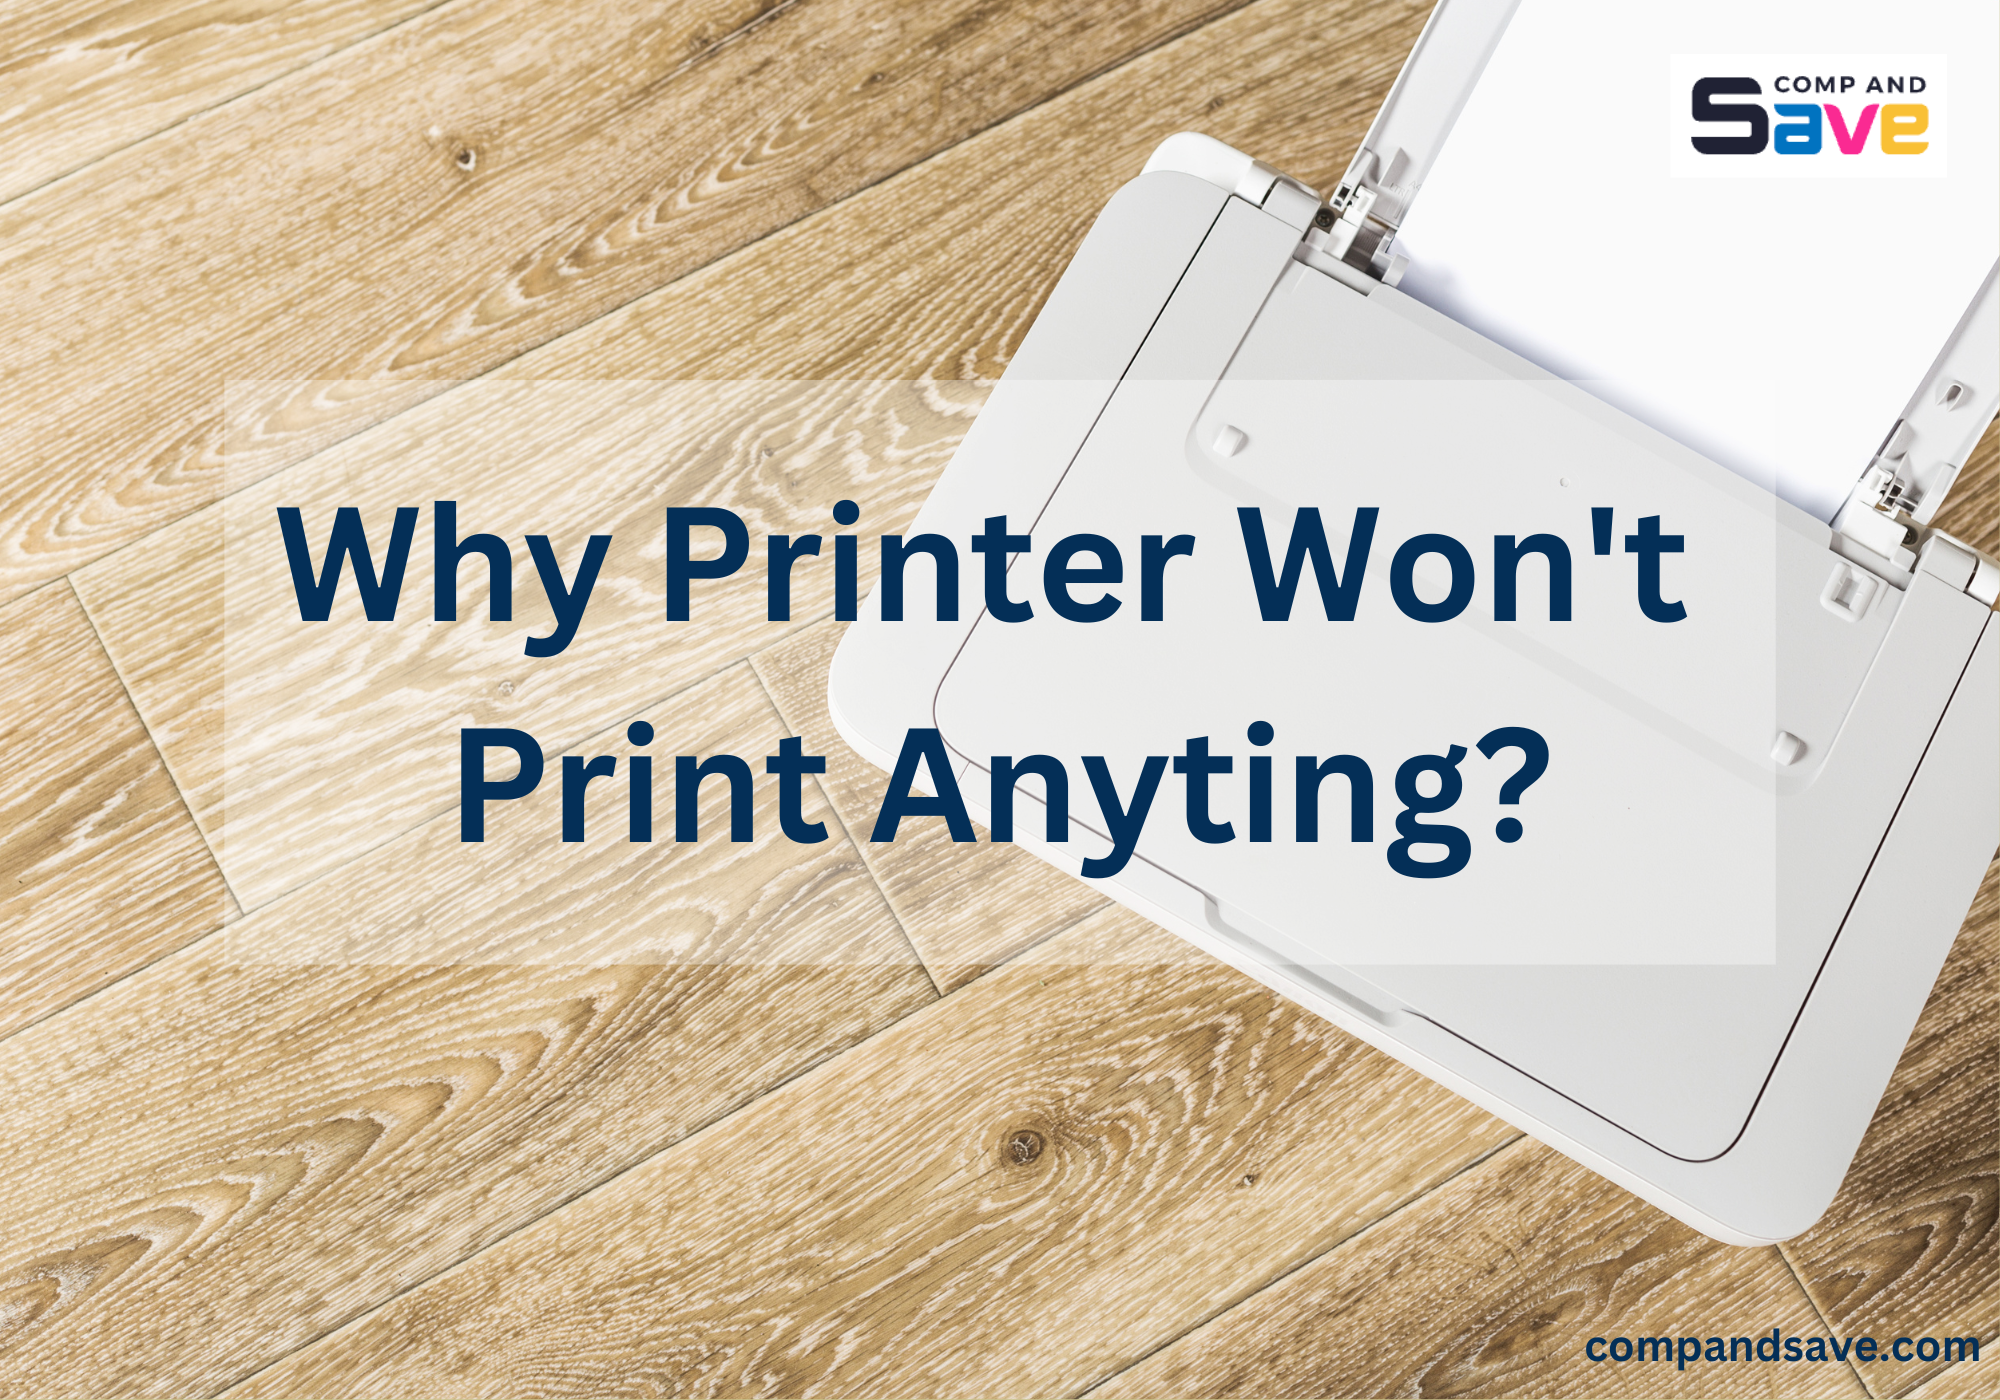 image from Printer Won't Print: Tips to Fix the Problem Easily!